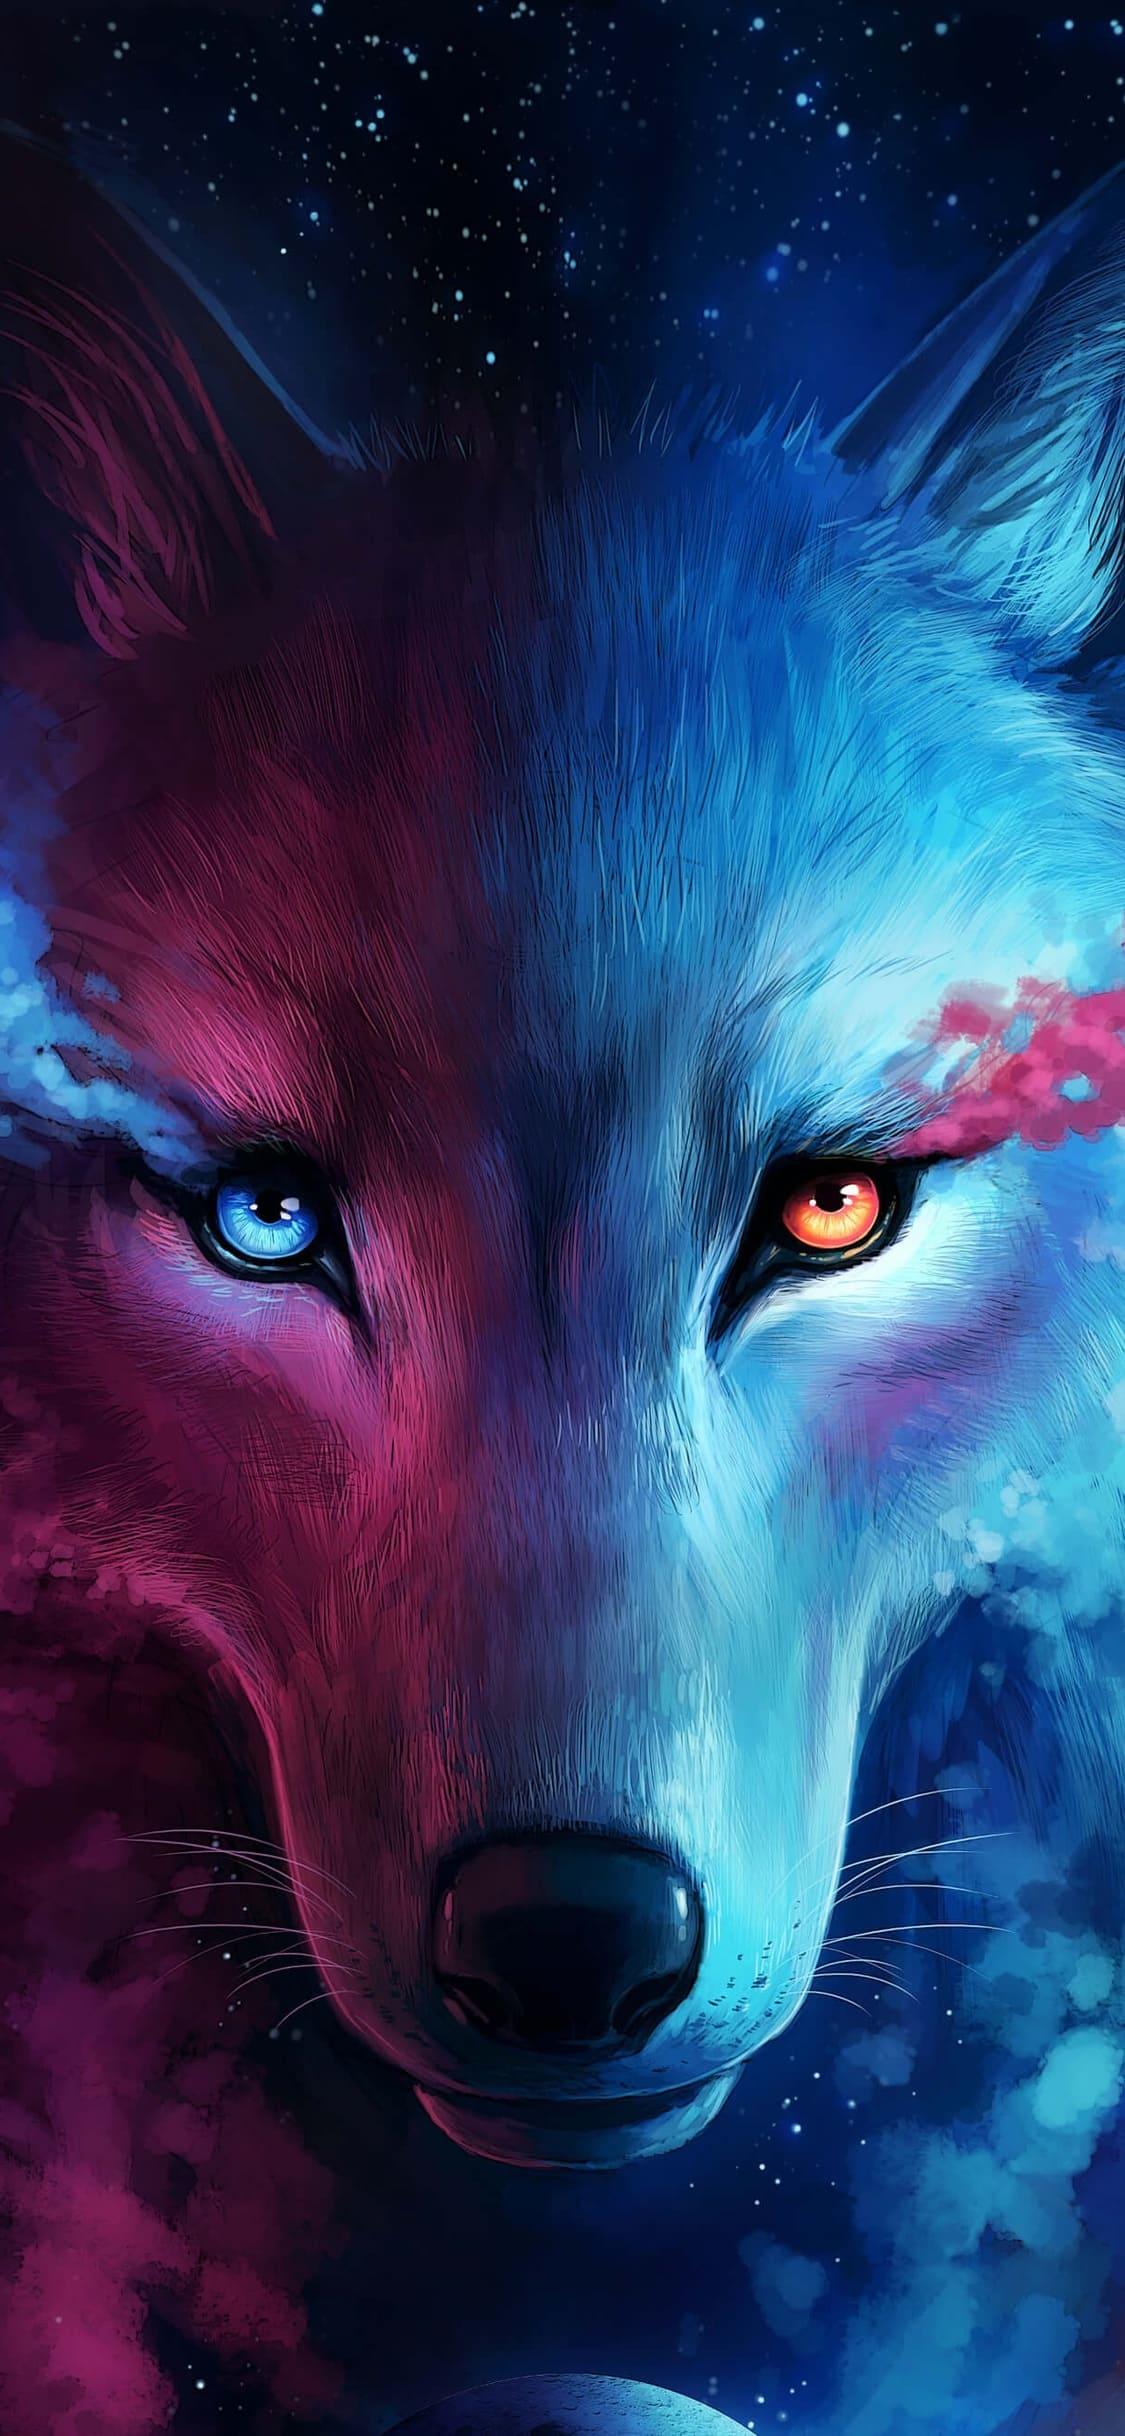 Wolf Aesthetic Wallpapers - Top Free Wolf Aesthetic Backgrounds ...